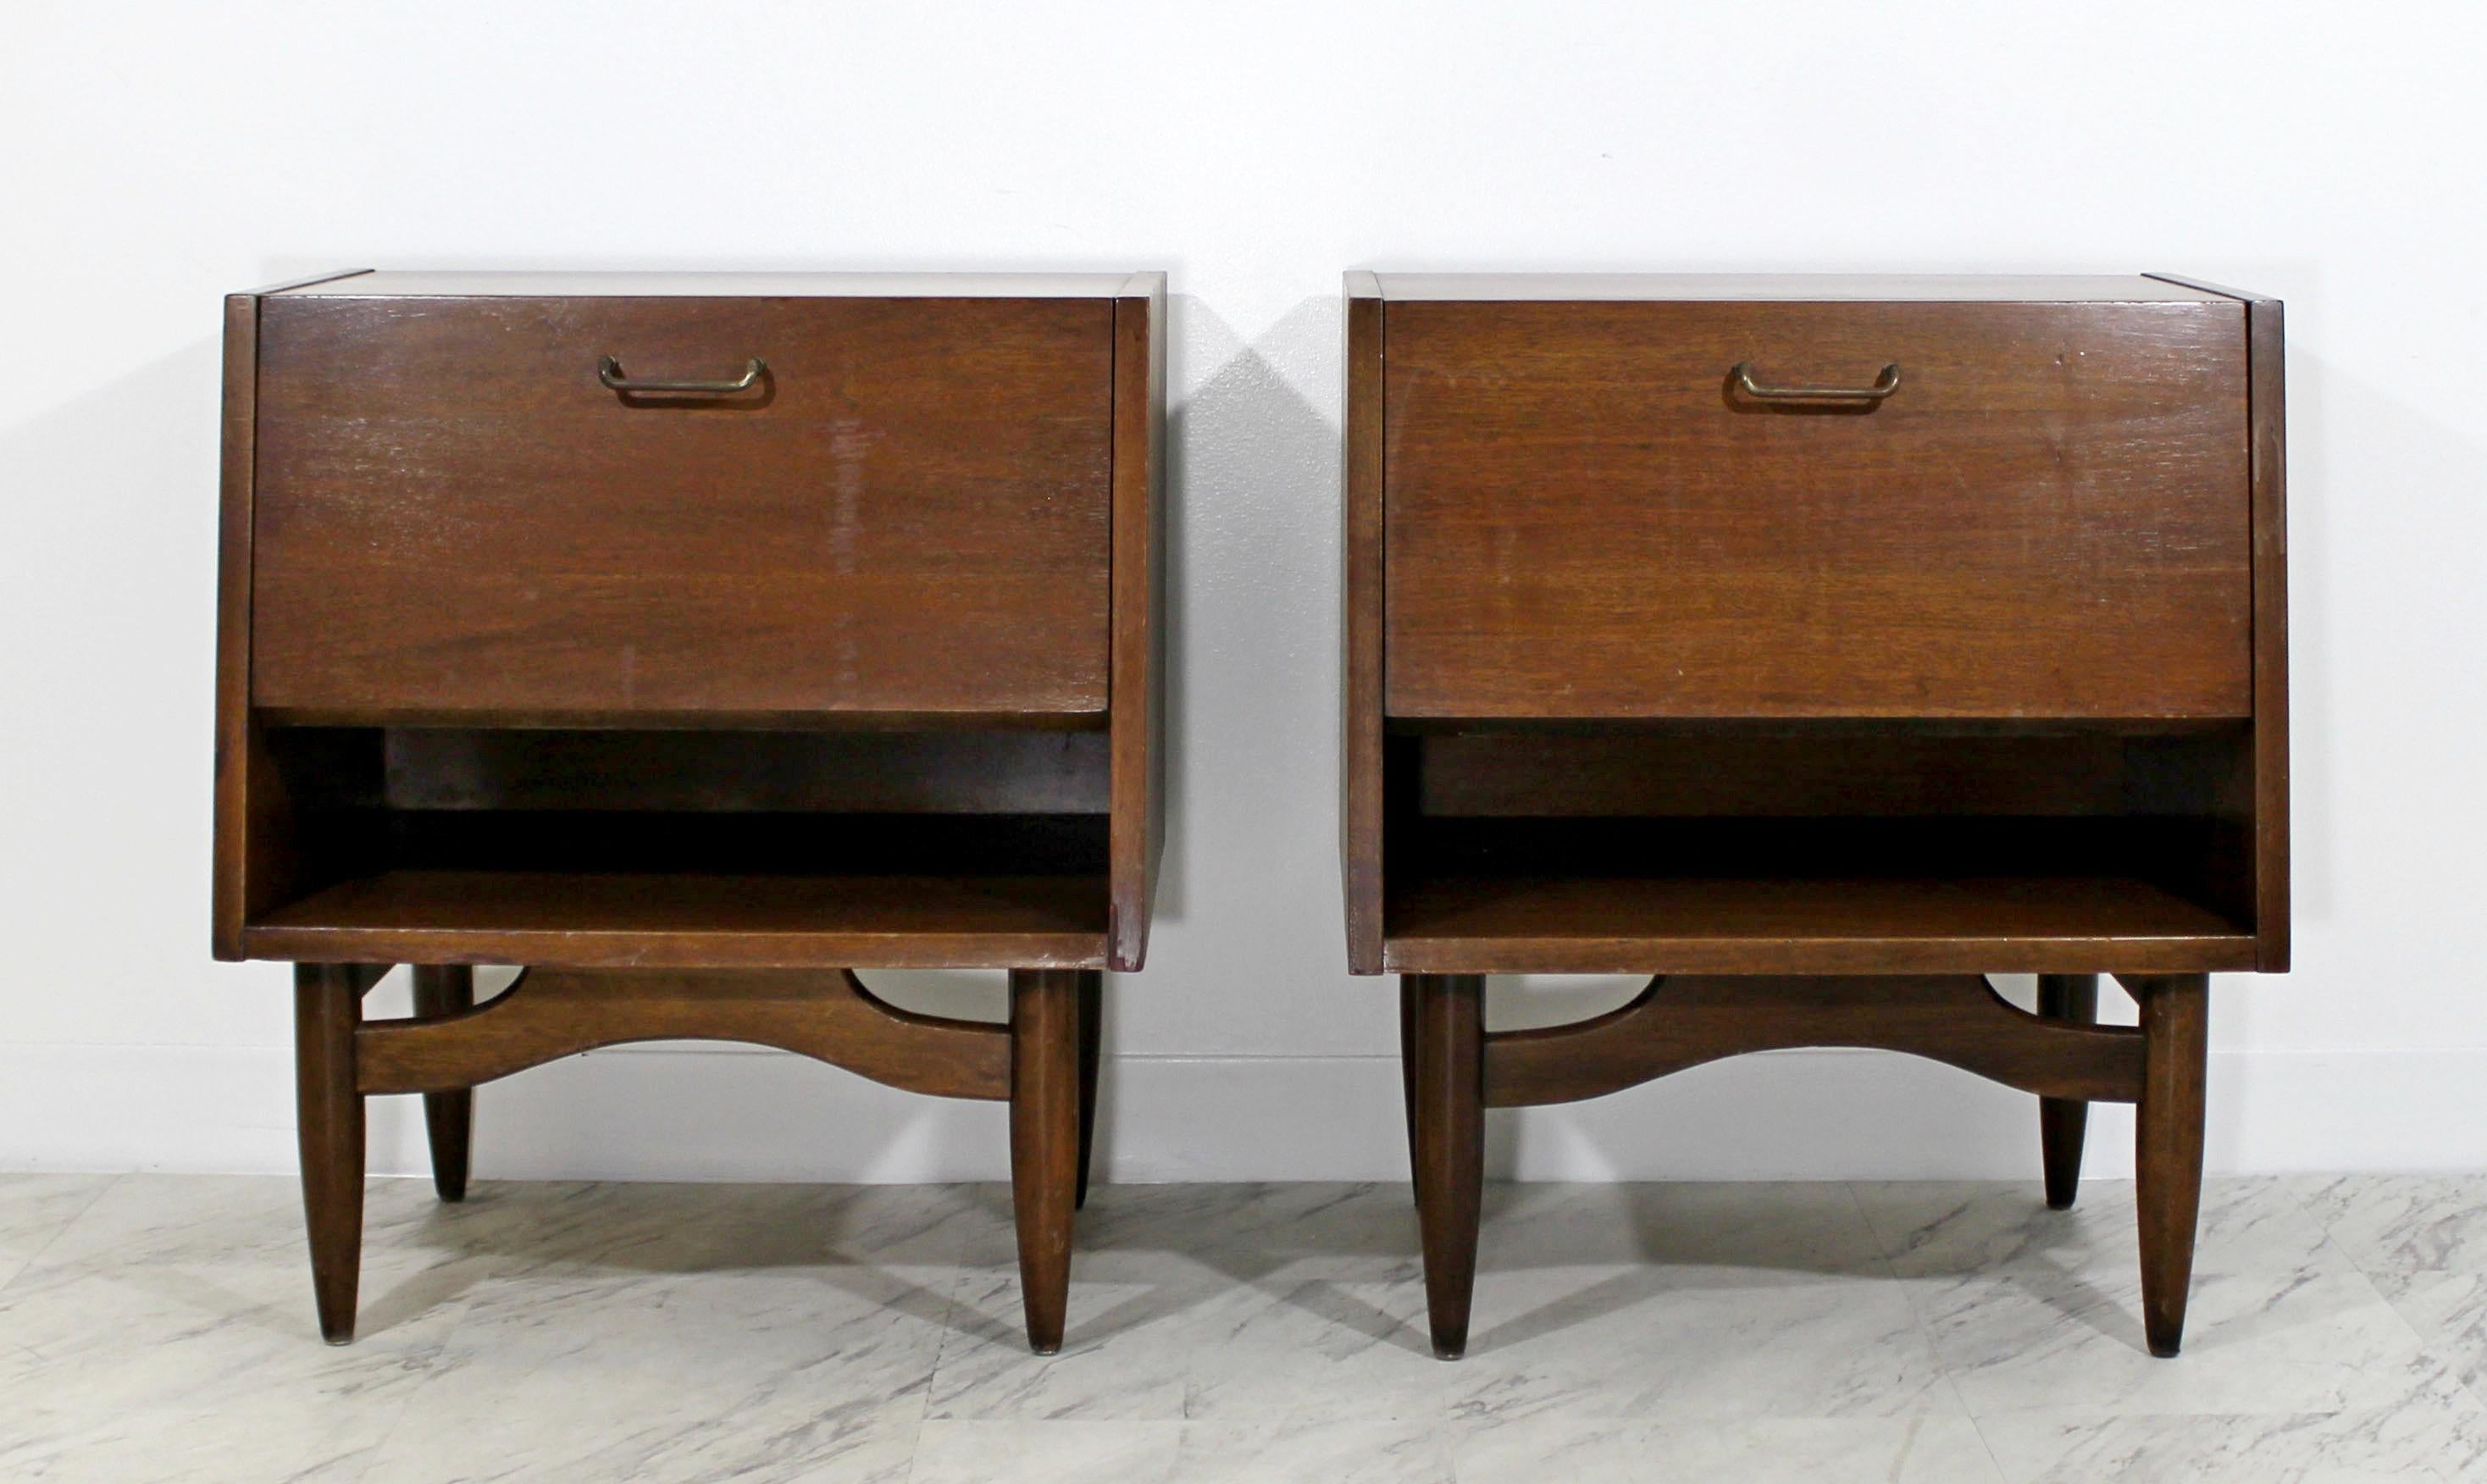 For your consideration are fantastic pairs of walnut dressers and nightstands, by Merton Gershun for American of Martinsville, circa the 1950s. In very good vintage condition. The dimensions of each dresser are 36